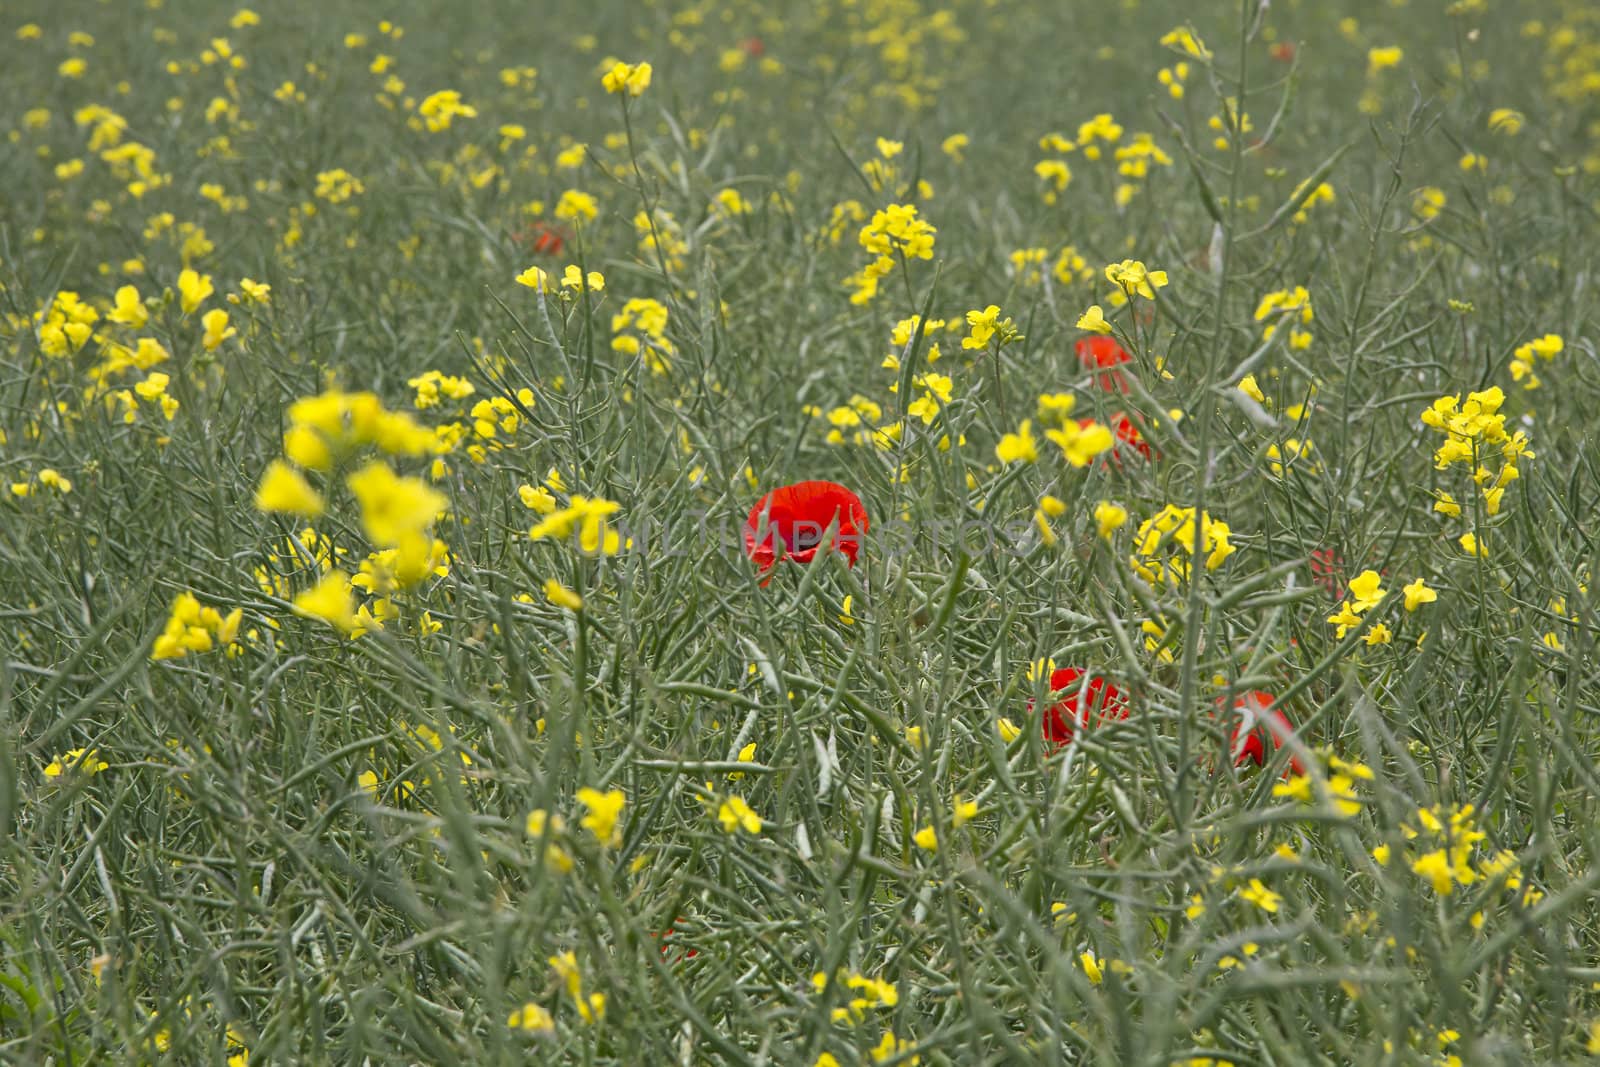 A bright red poppy surrounded by yellow rapeseed